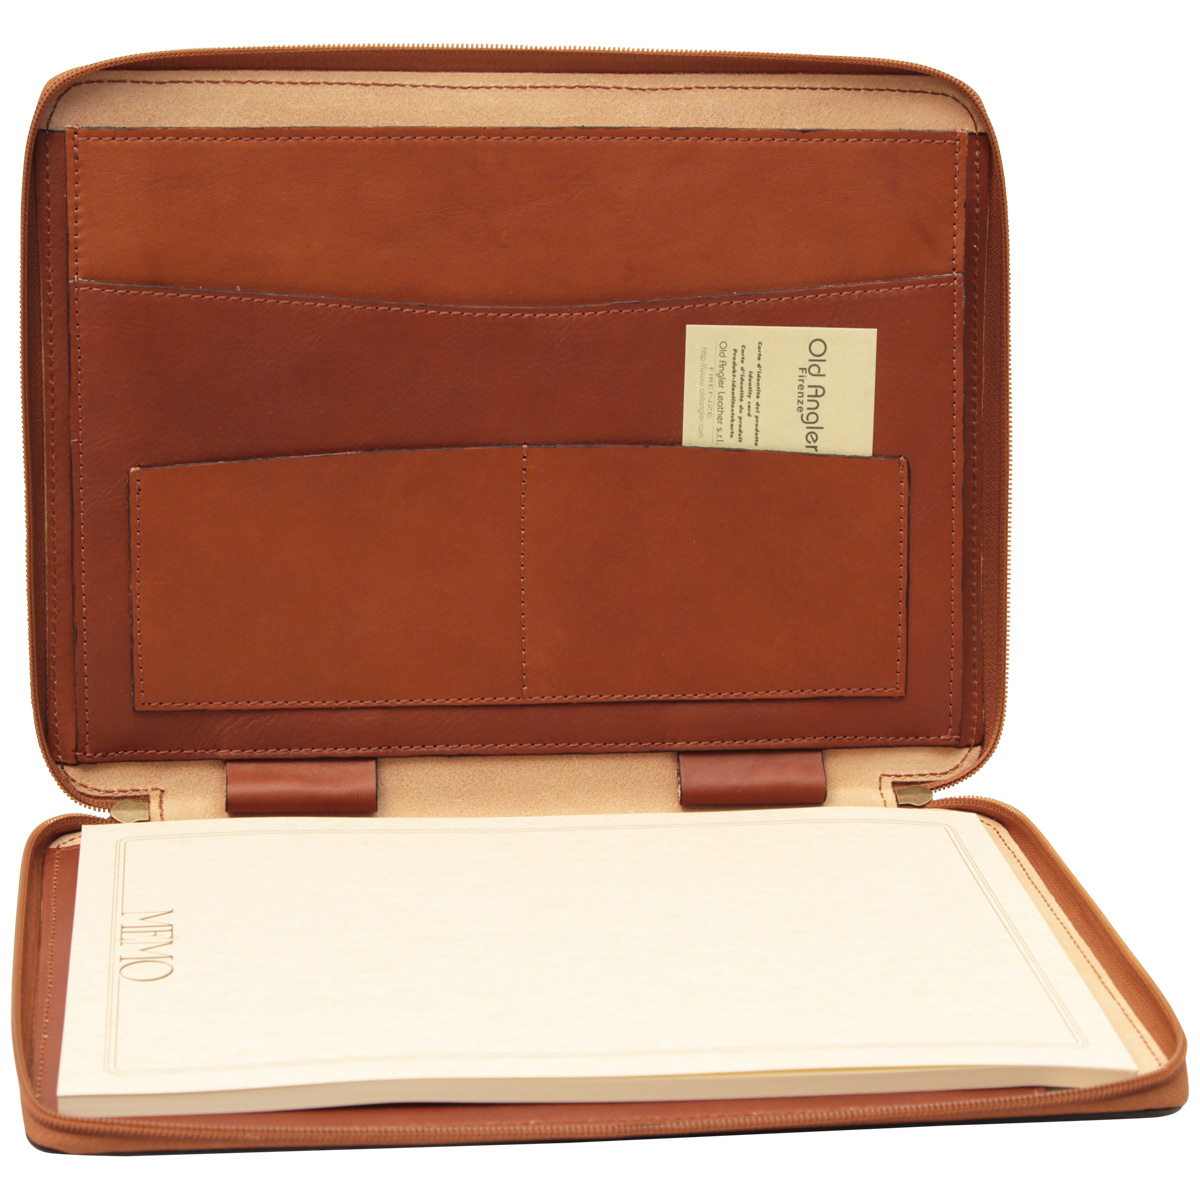 Cowhide leather portfolio - Brown Colonial | 059489CO UK | Old Angler Firenze